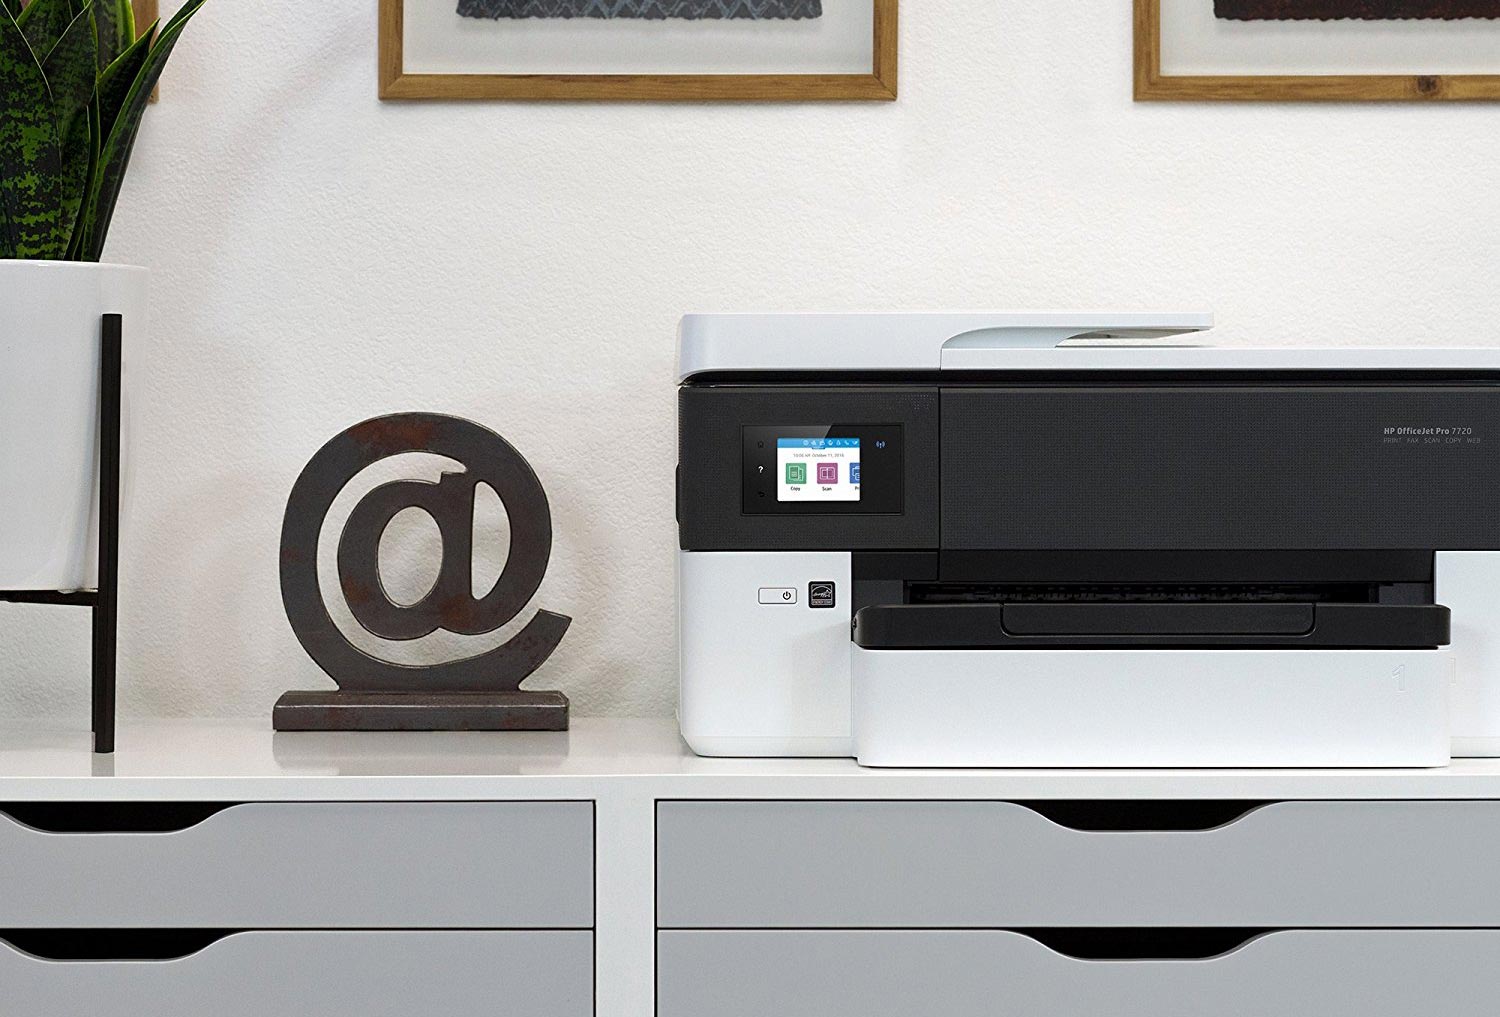 HP OfficeJet Pro 7720 Printer Review: Great Quality, Mediocre